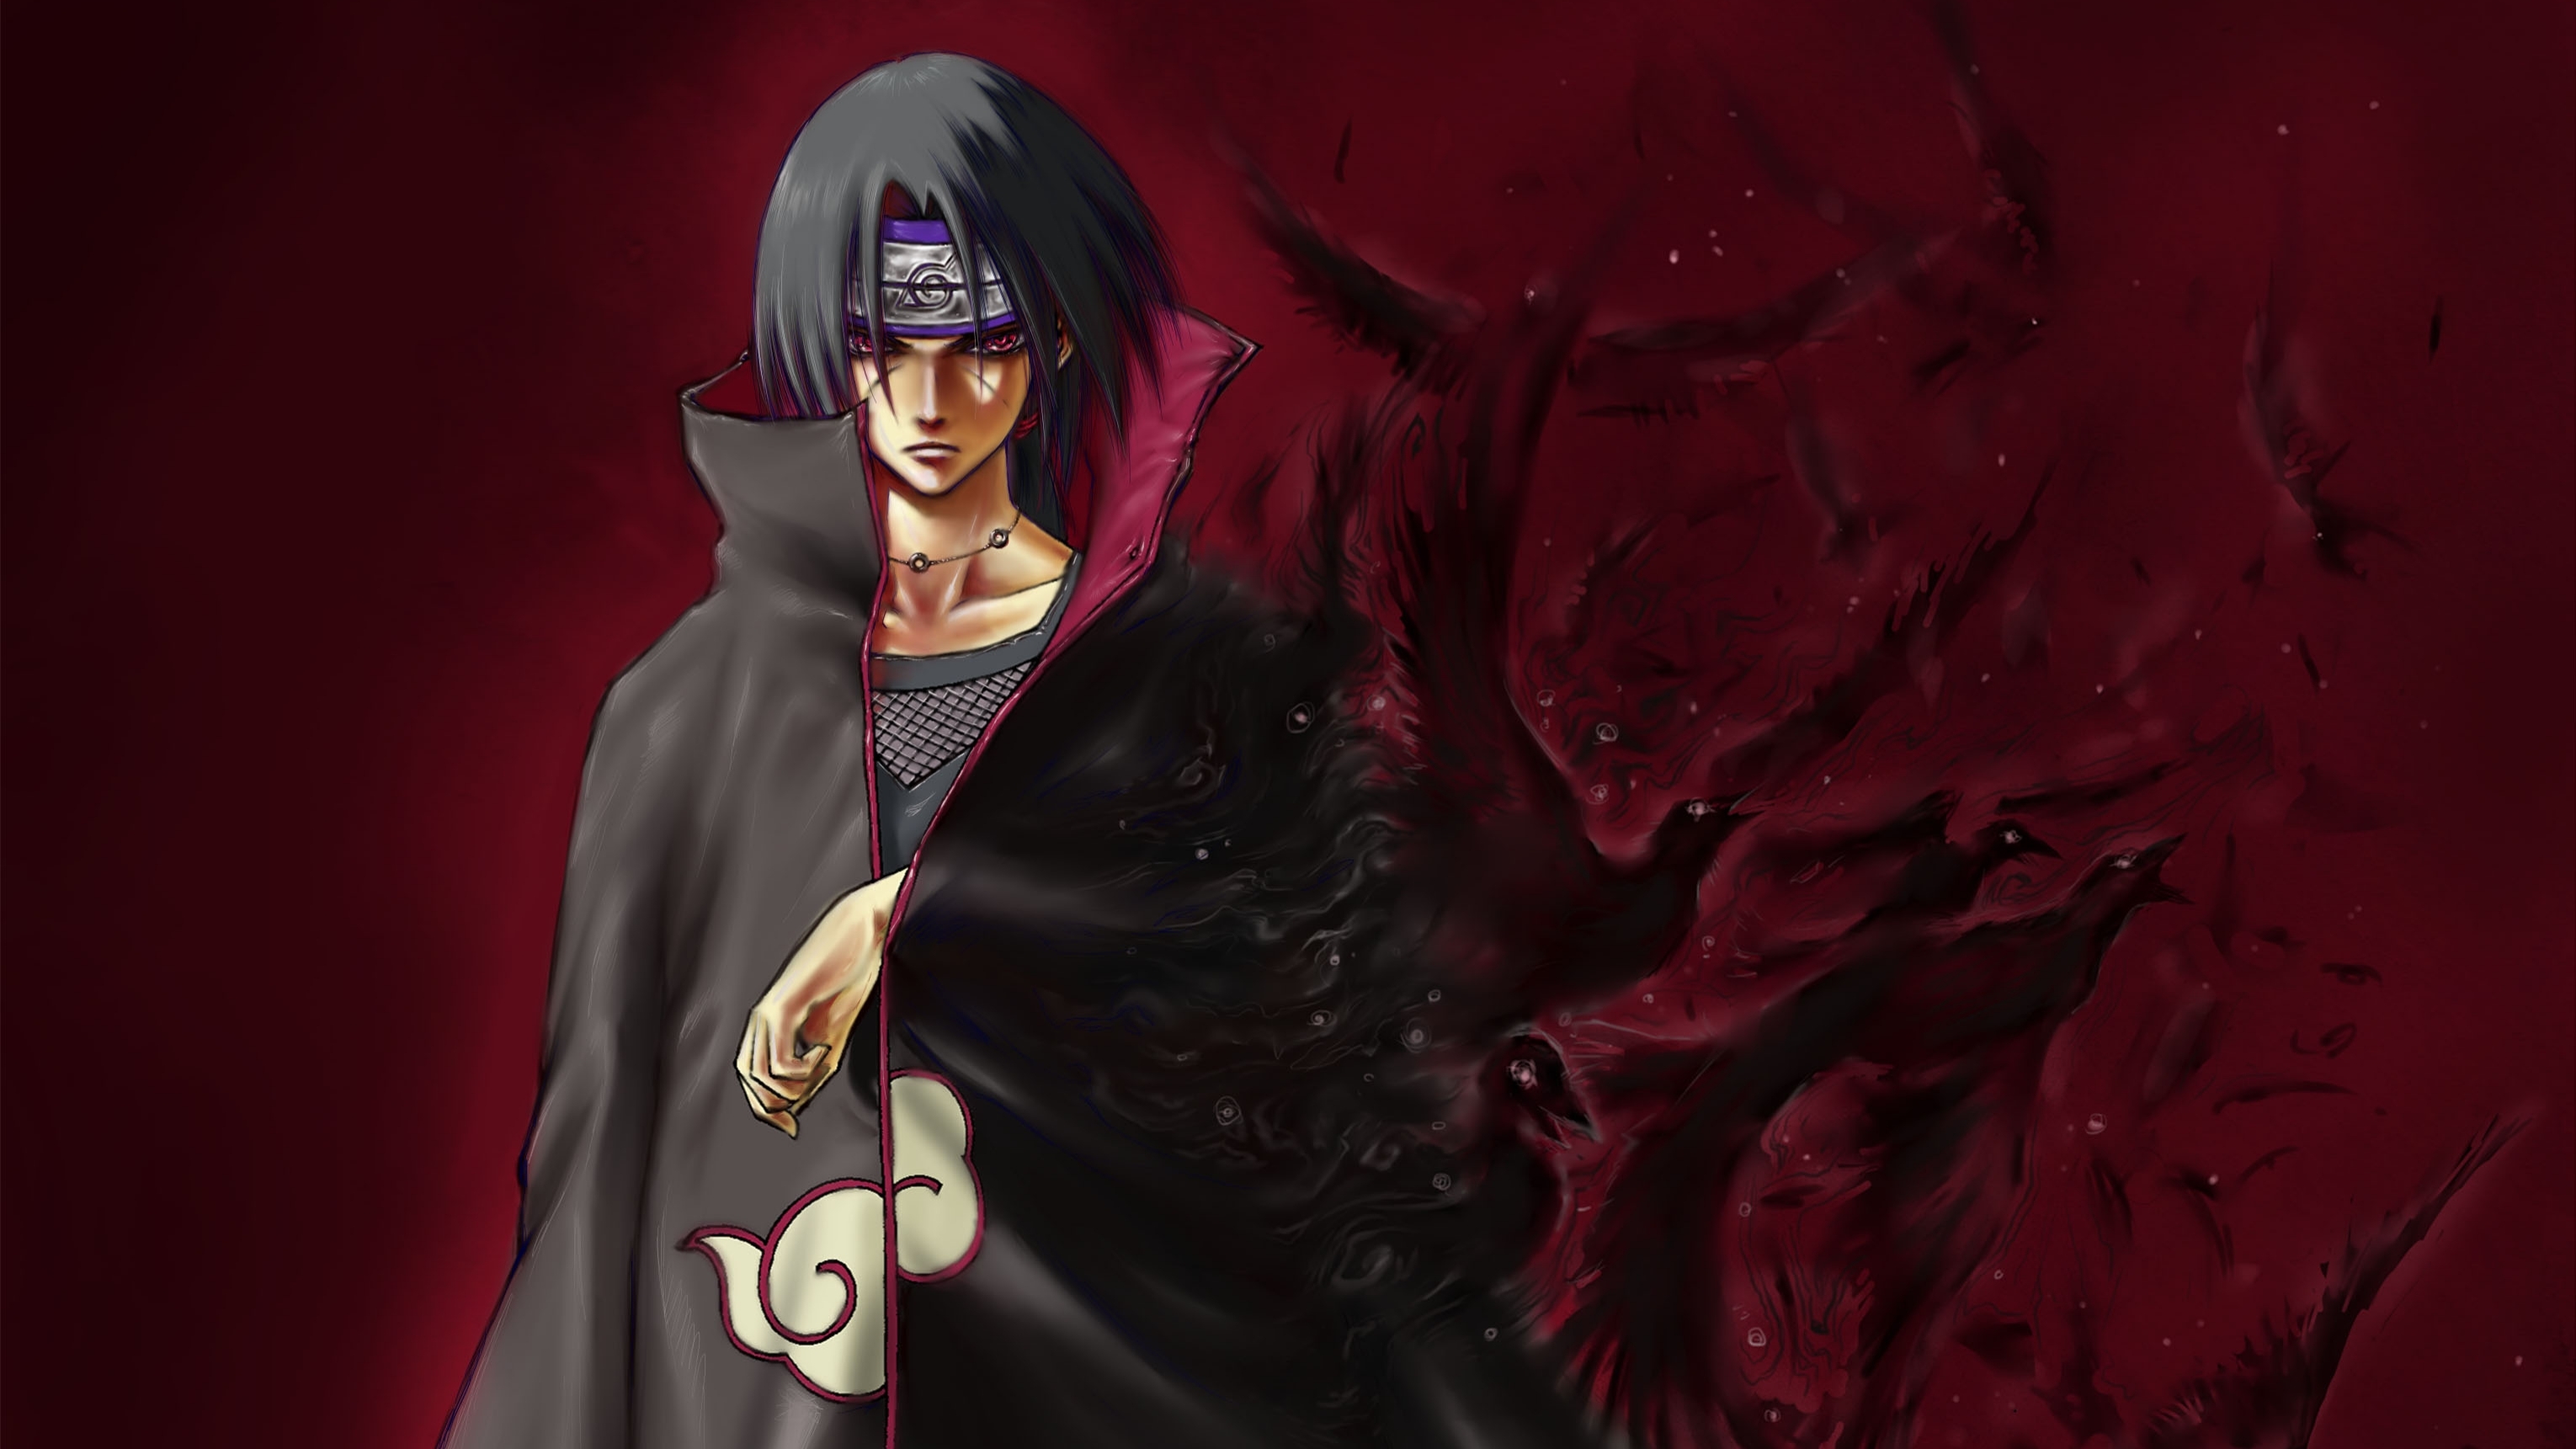 Uchiha Itachi Cartoon Wallpaper poster on quality paper 13x19 Paper Print   Art  Paintings posters in India  Buy art film design movie music  nature and educational paintingswallpapers at Flipkartcom